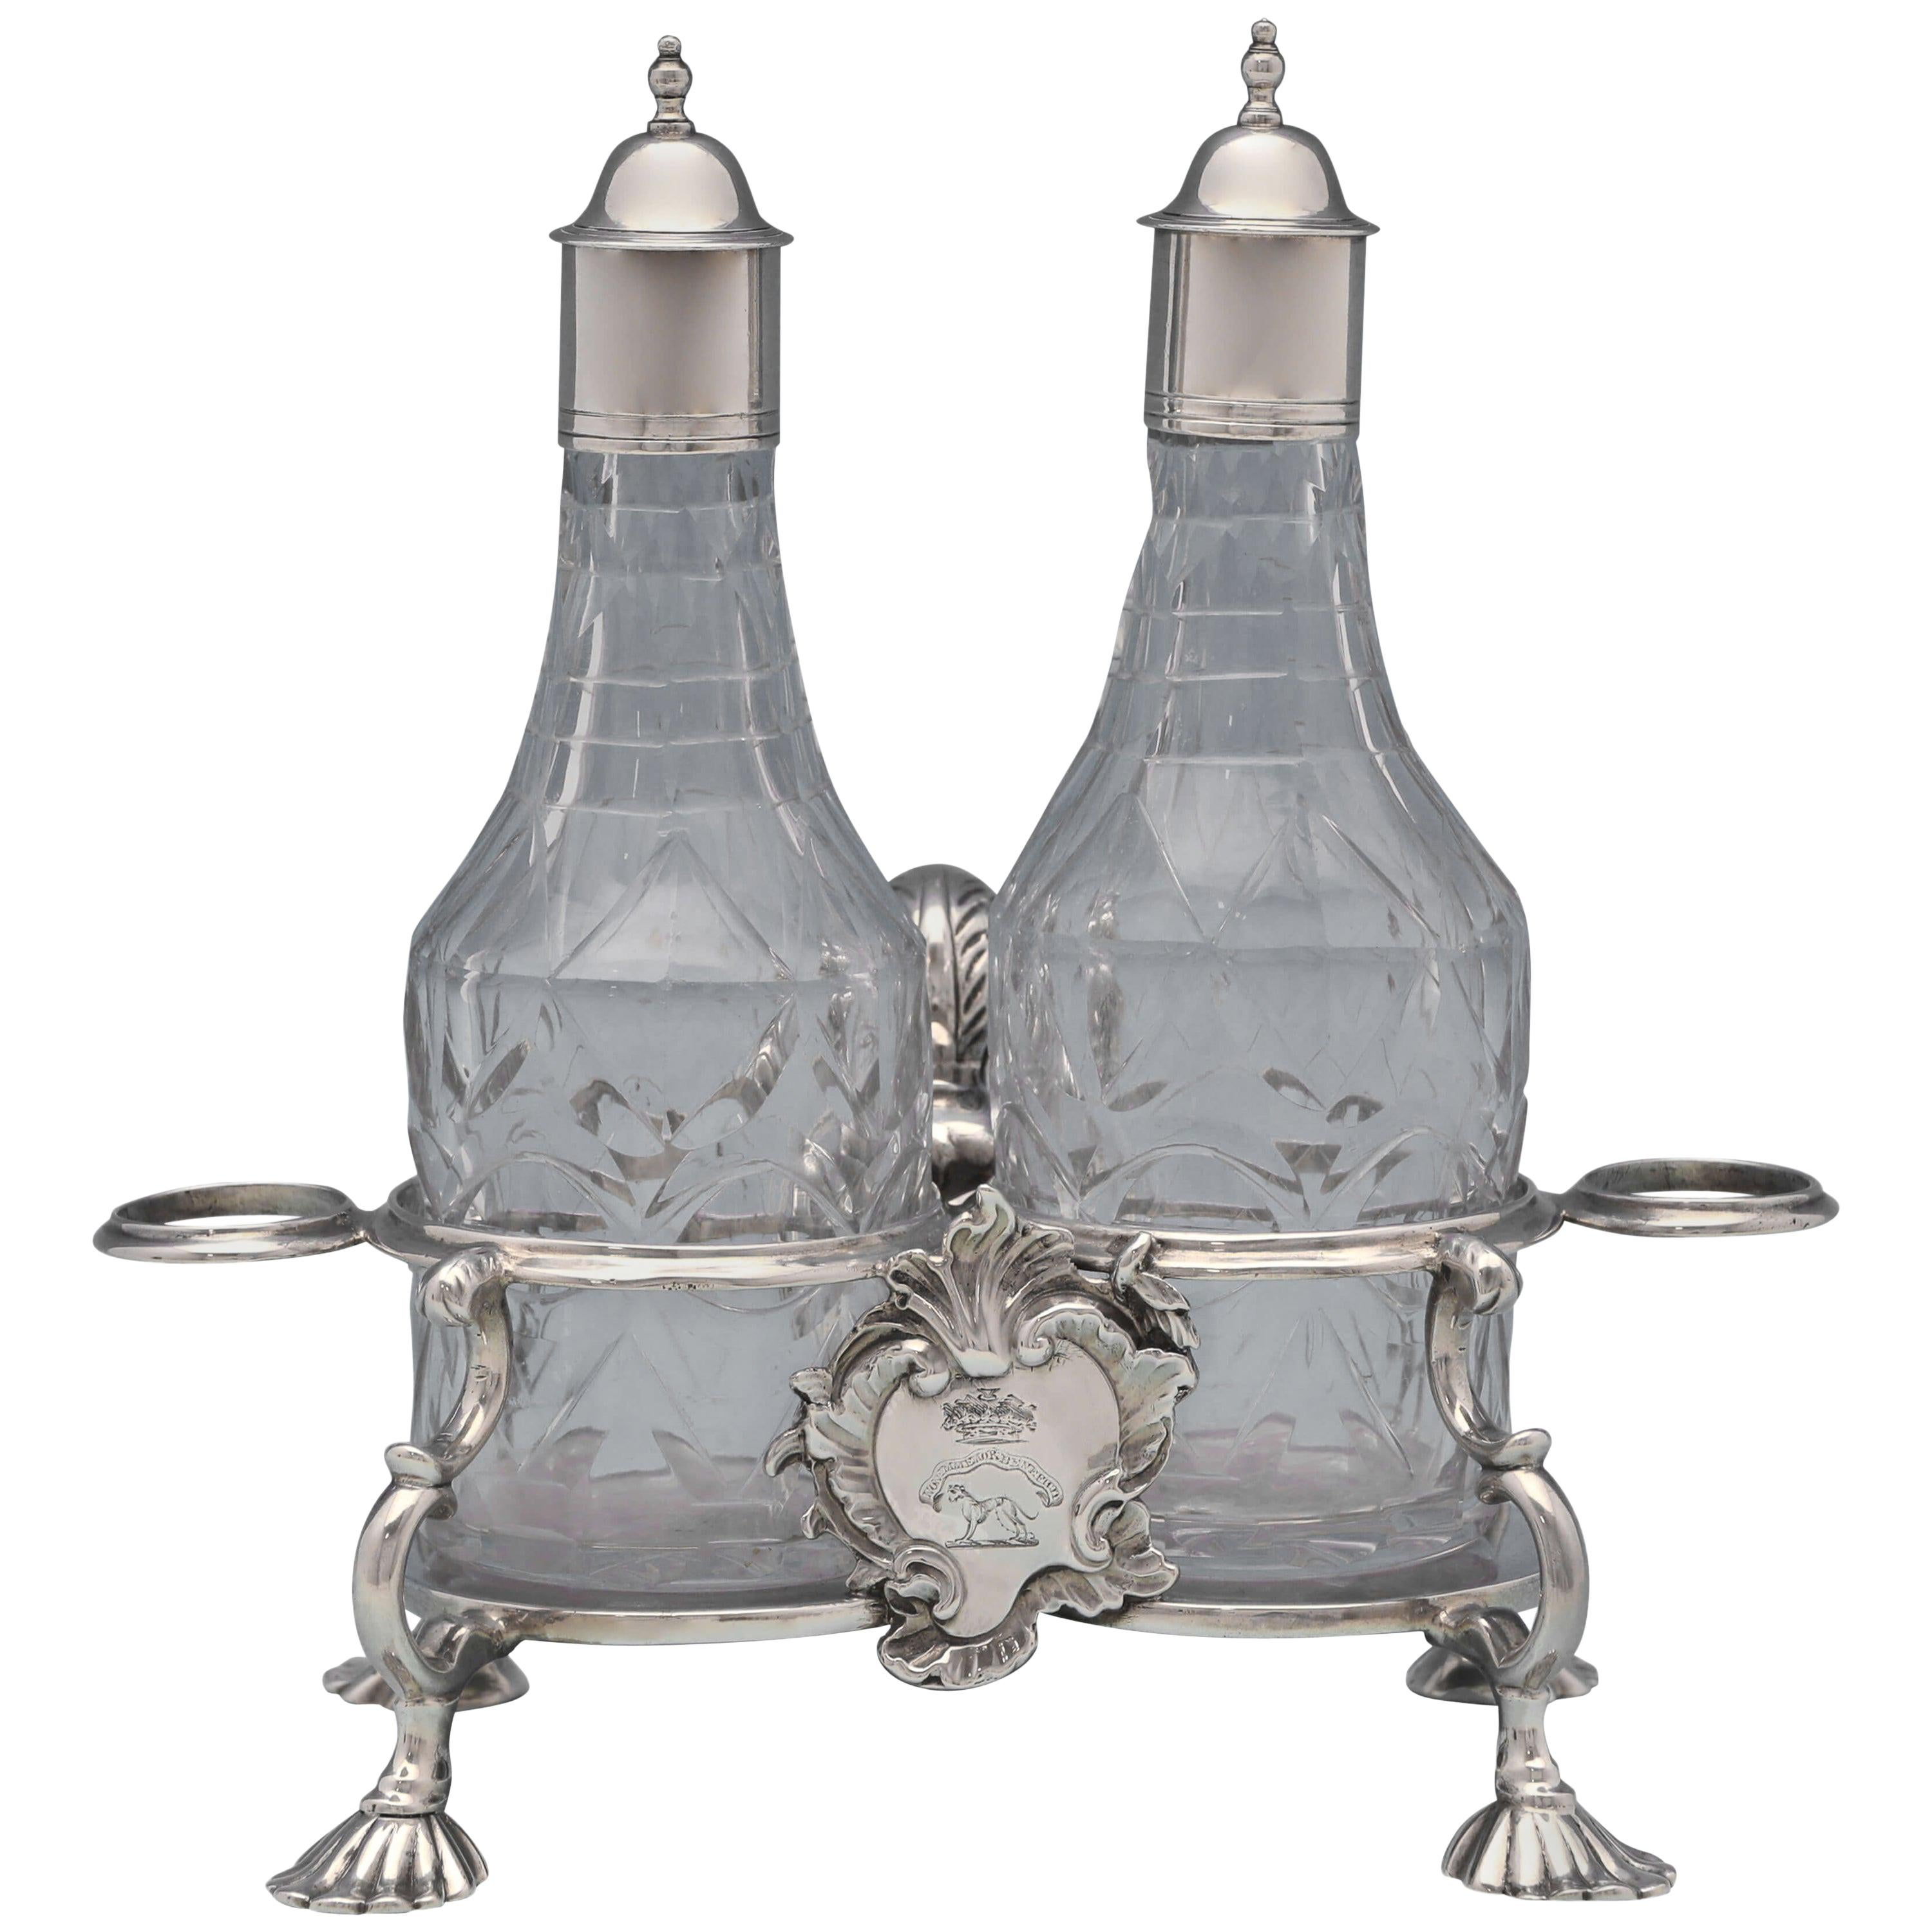 George II Antique Sterling Silver Oil and Vinegar Set by Samuel Wood in 1751 For Sale